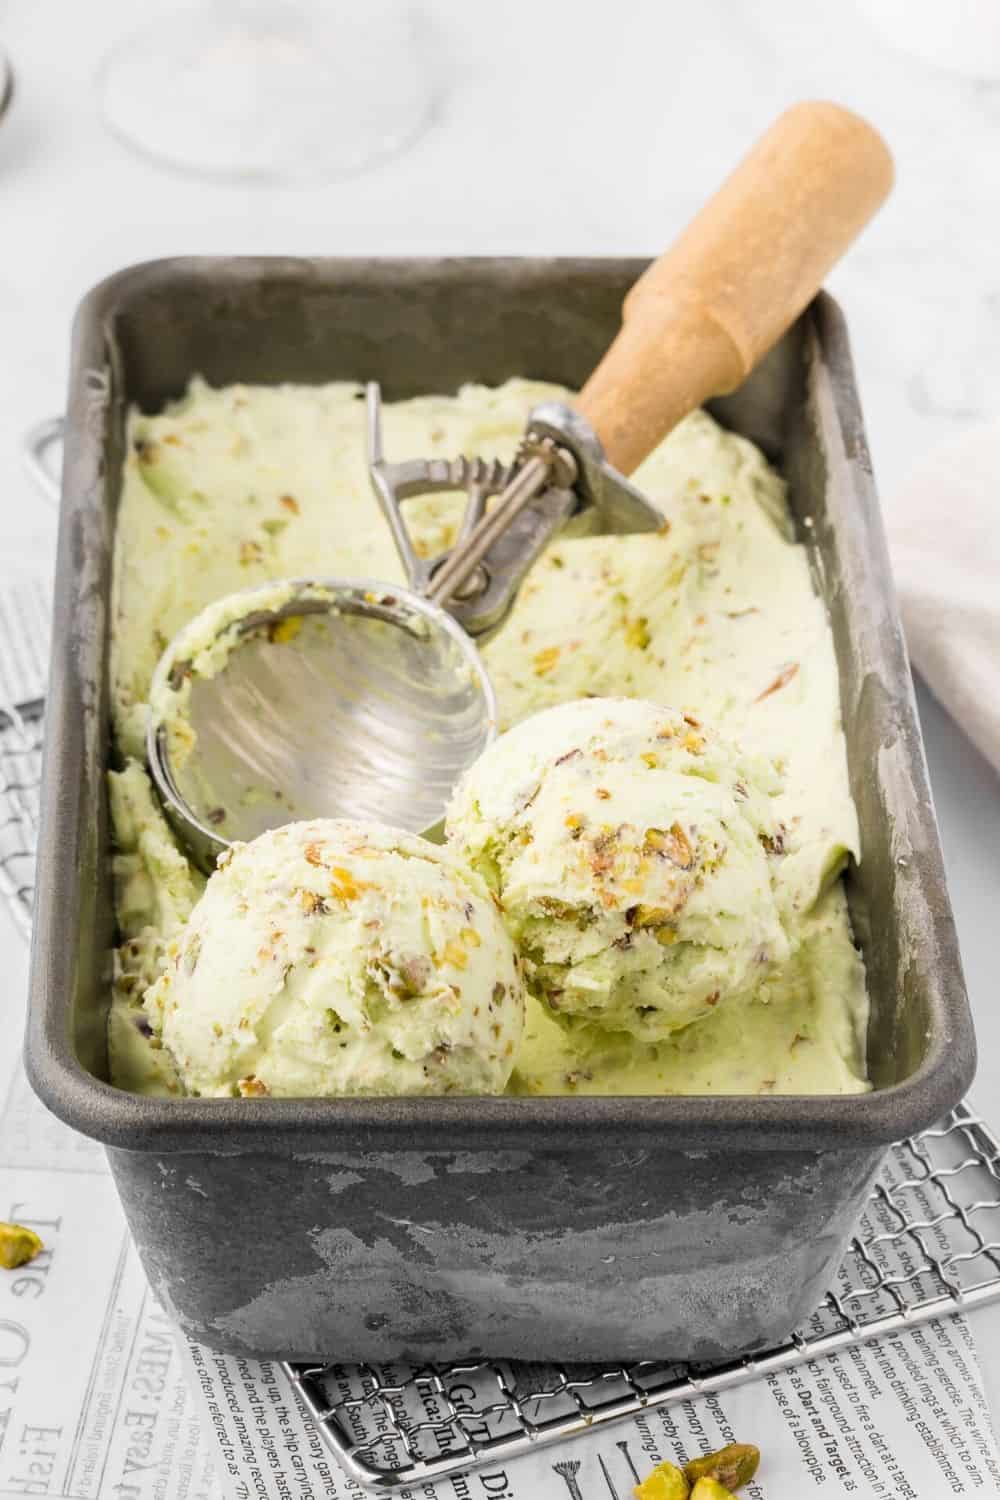 scoops of eggless homemade pistachio ice cream on the surface of the ice cream container.